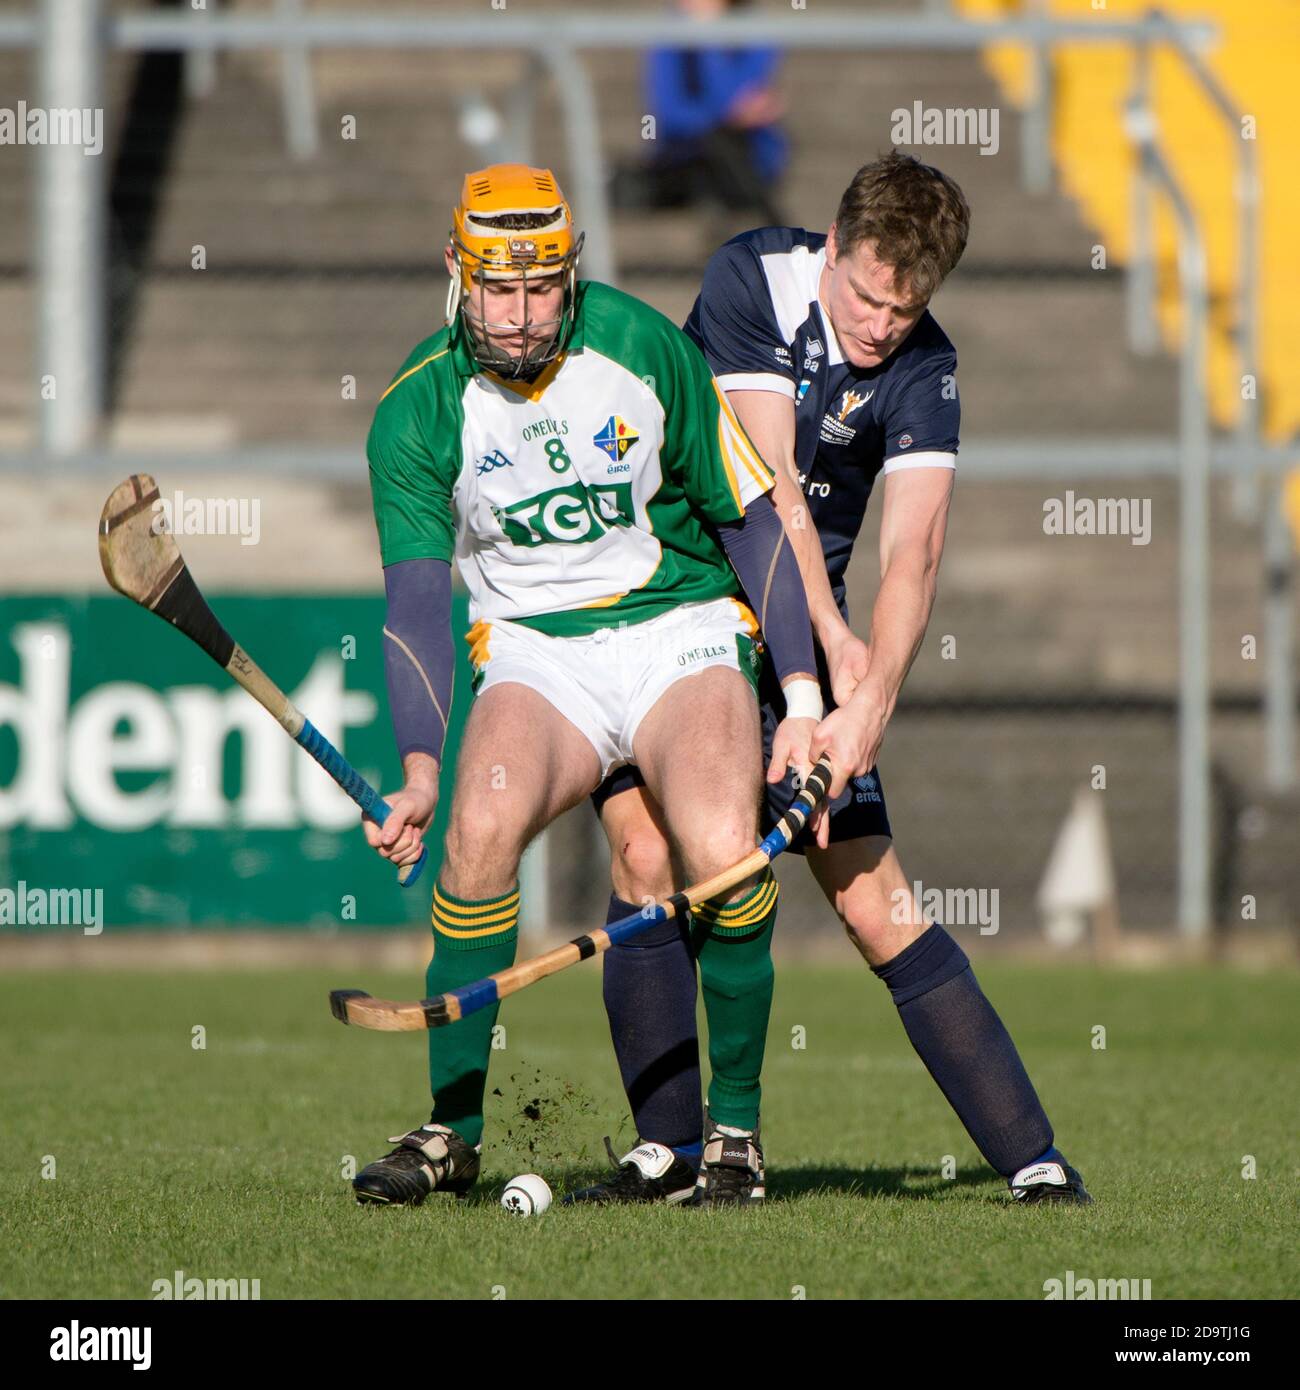 Eire v Scotland, shinty / hurling international, played in Ennis, Co. Clare, Ireland.  The Scottish player breaks his stick / caman in the challenge. Stock Photo